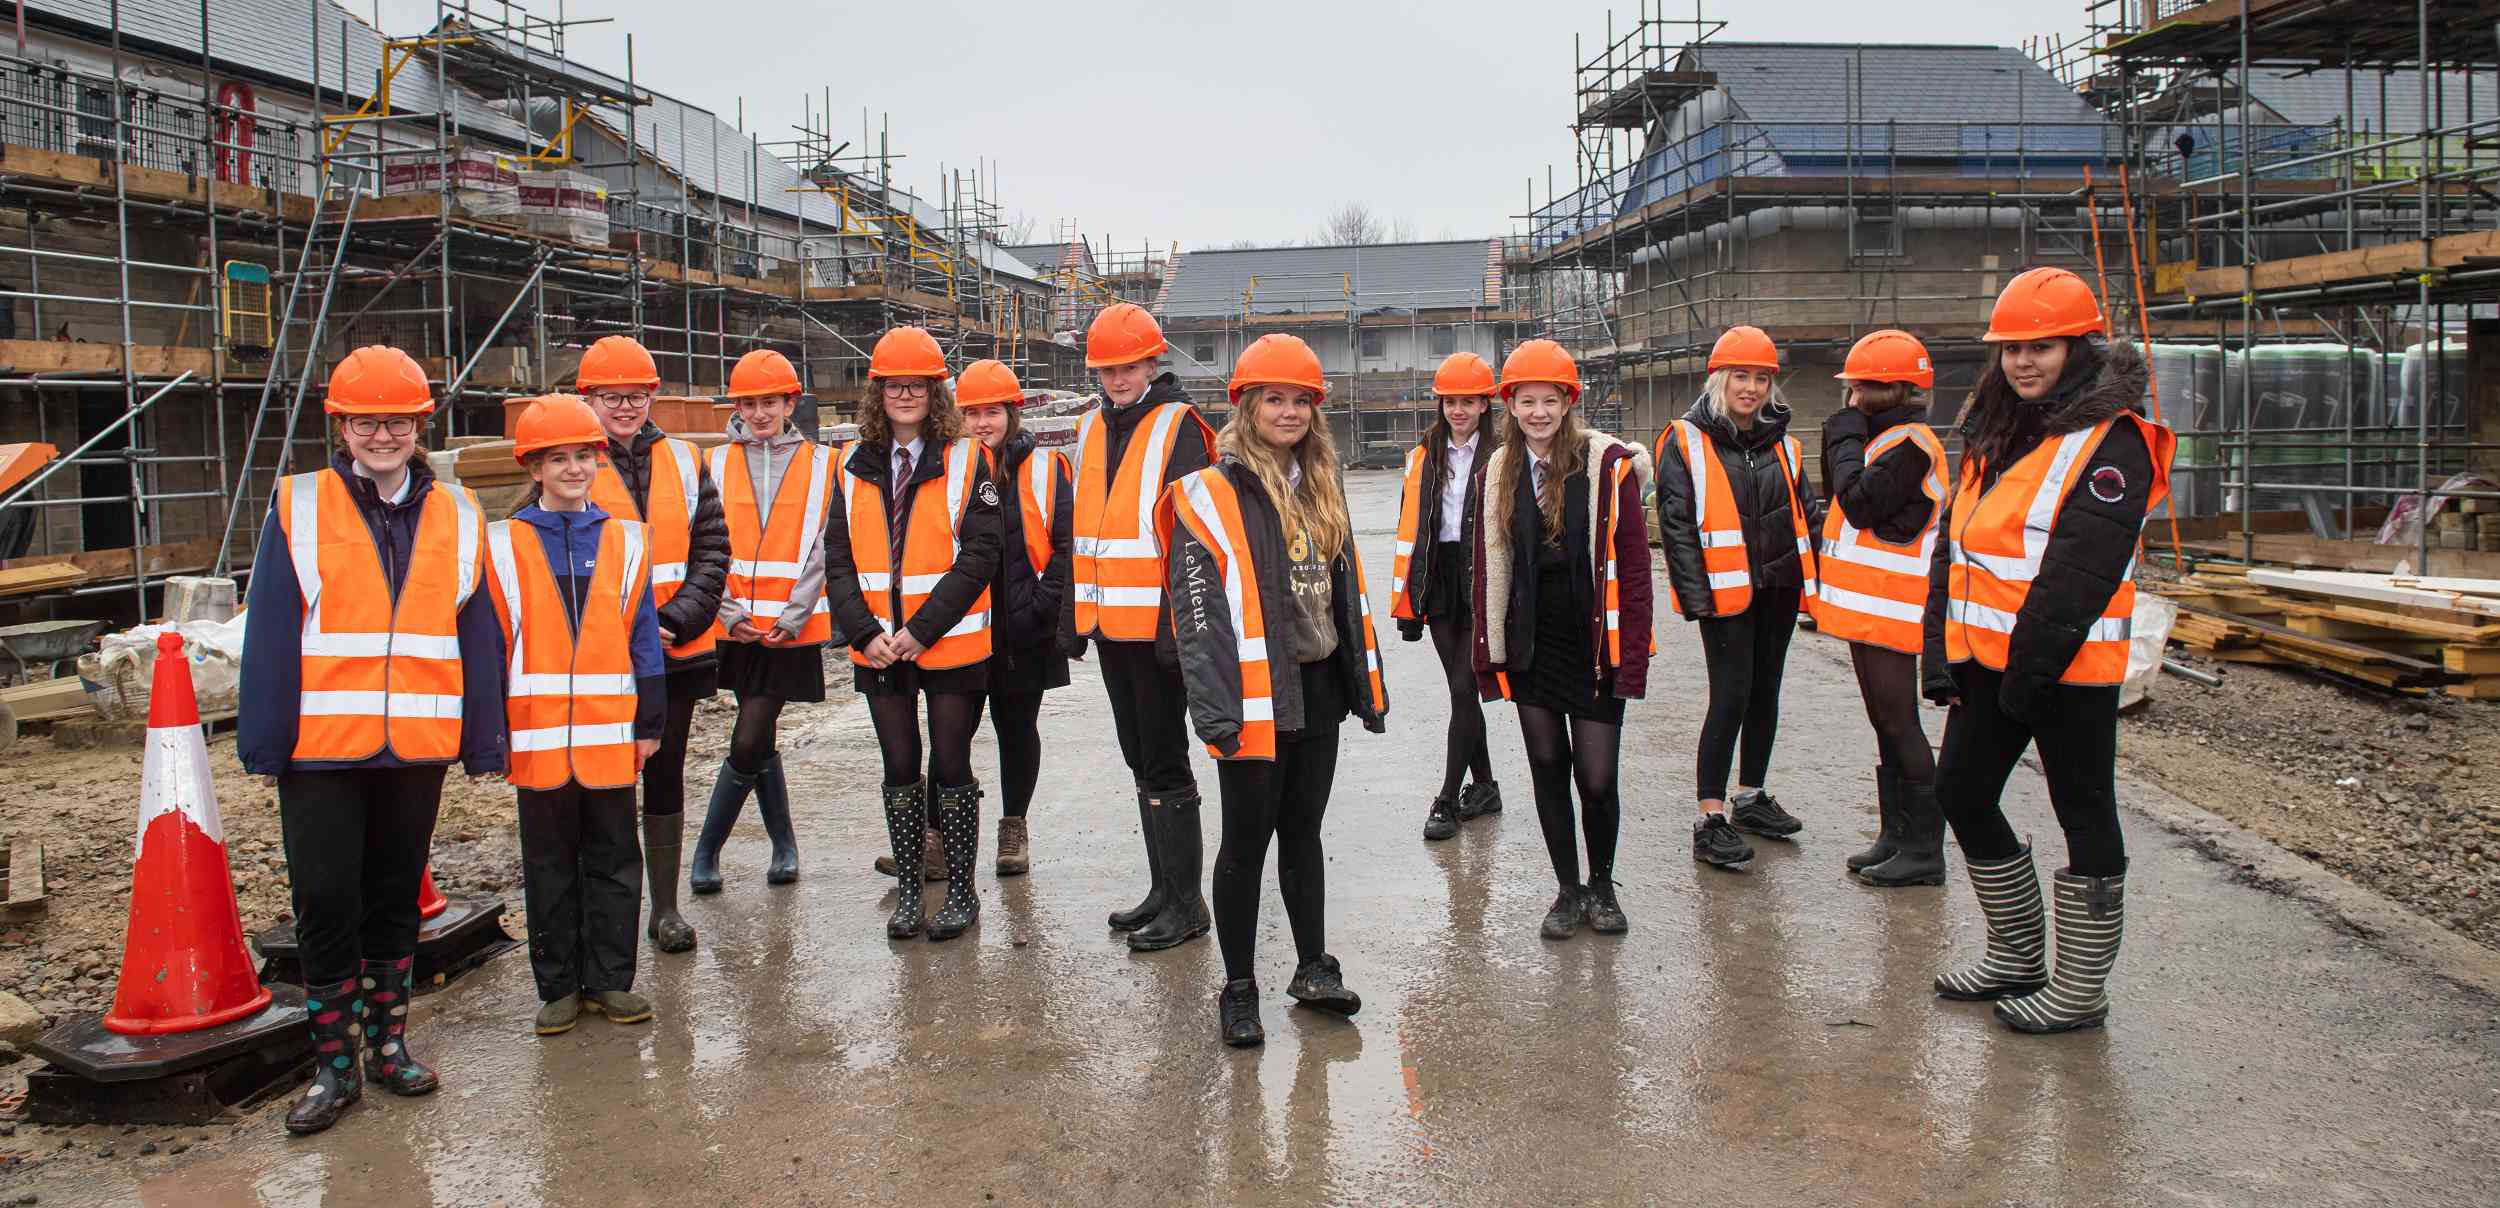 Students from Year 9 and 10 at Nidderdale High School during a visit to the Brierley Homes housing development, Millwright Park in Pateley Bridge.